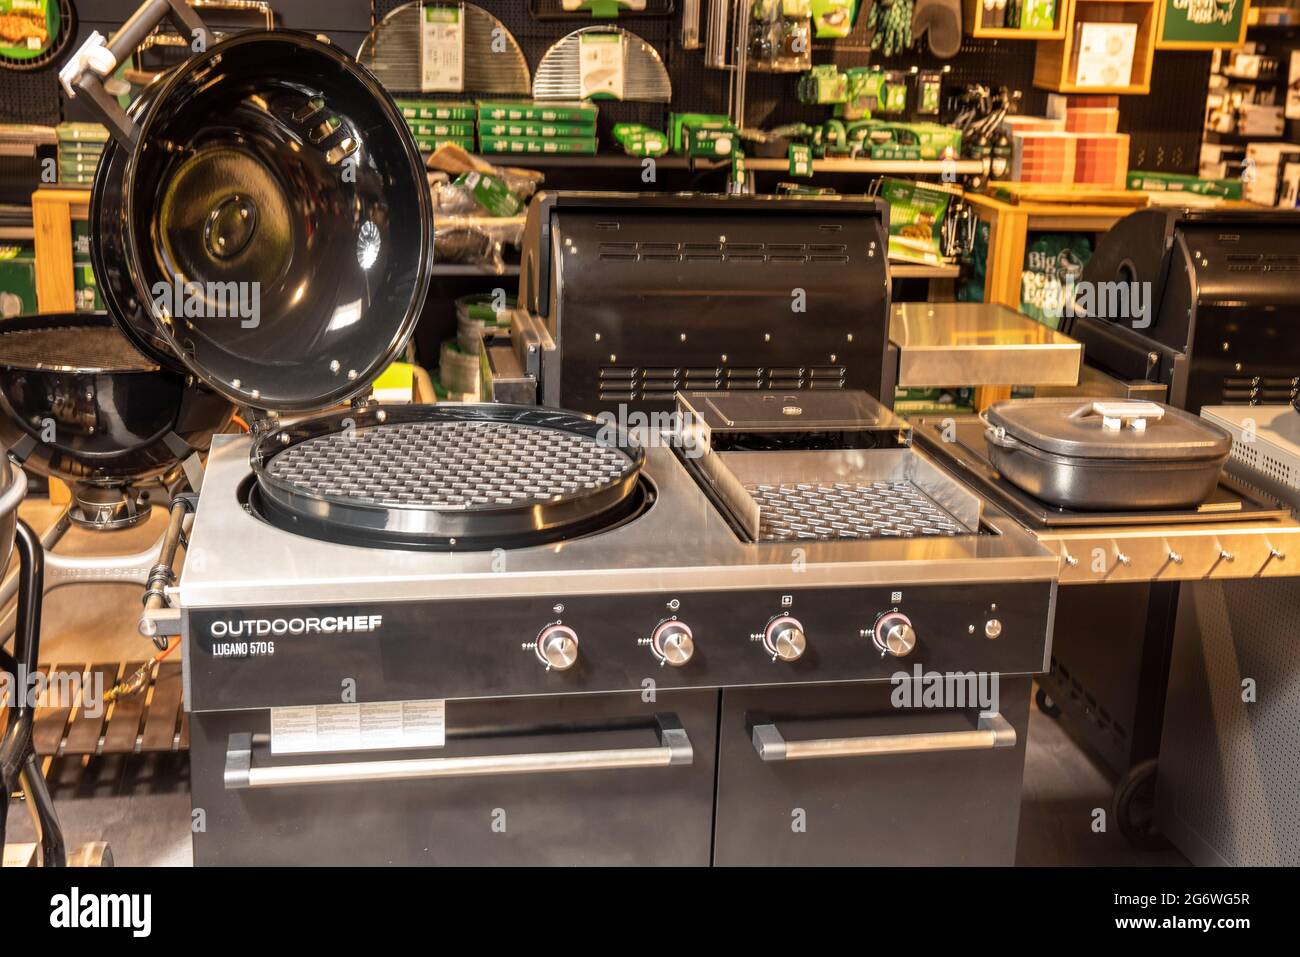 Bad Hersfeld, Germany. 30th June, 2021. An Outdoorchef Lugano grill station  stands in the headquarters of Grillfürst GmbH. (to dpa "With steaks and  corn on the cob: barbecue industry booms in Corona